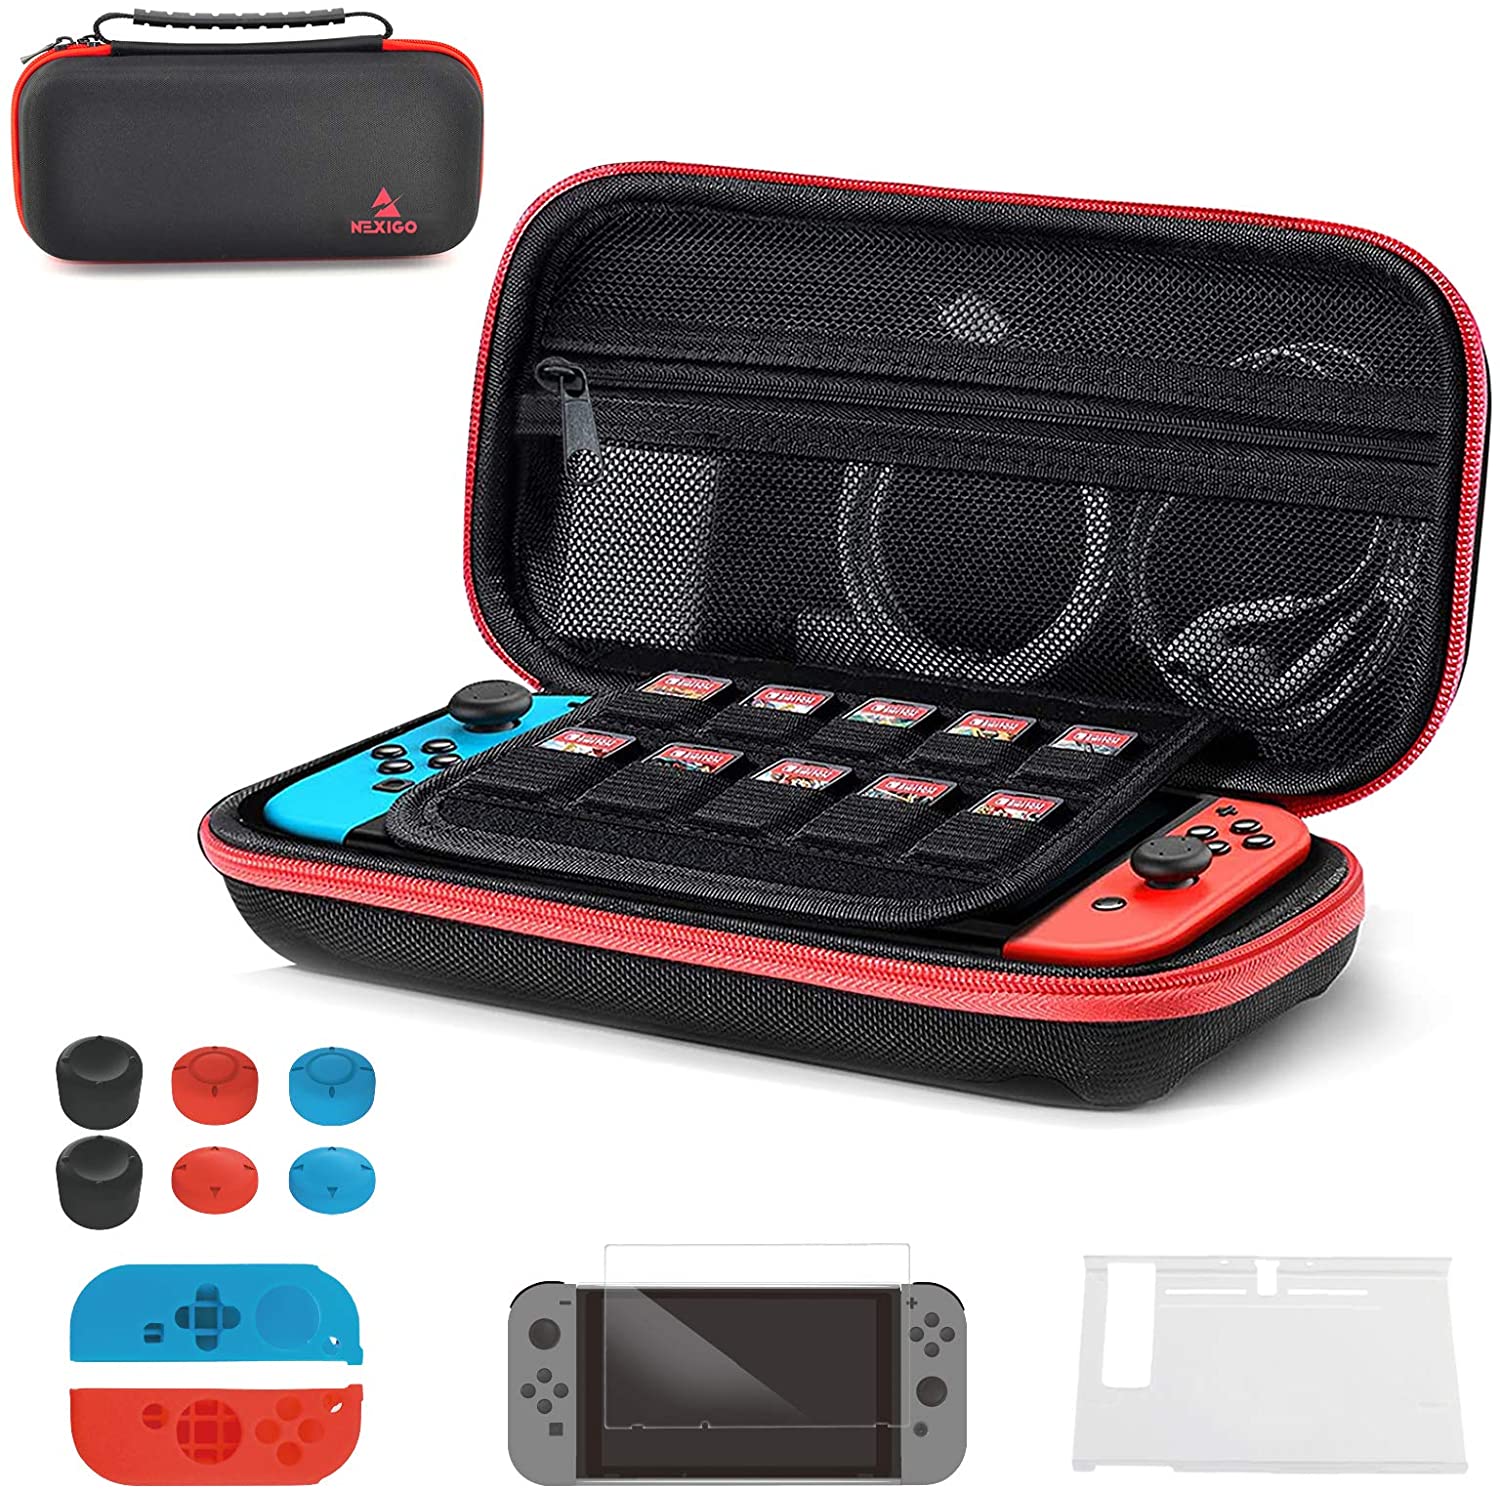 The bag comes with a series of Switch accessories and is capable of holding the Switch console.